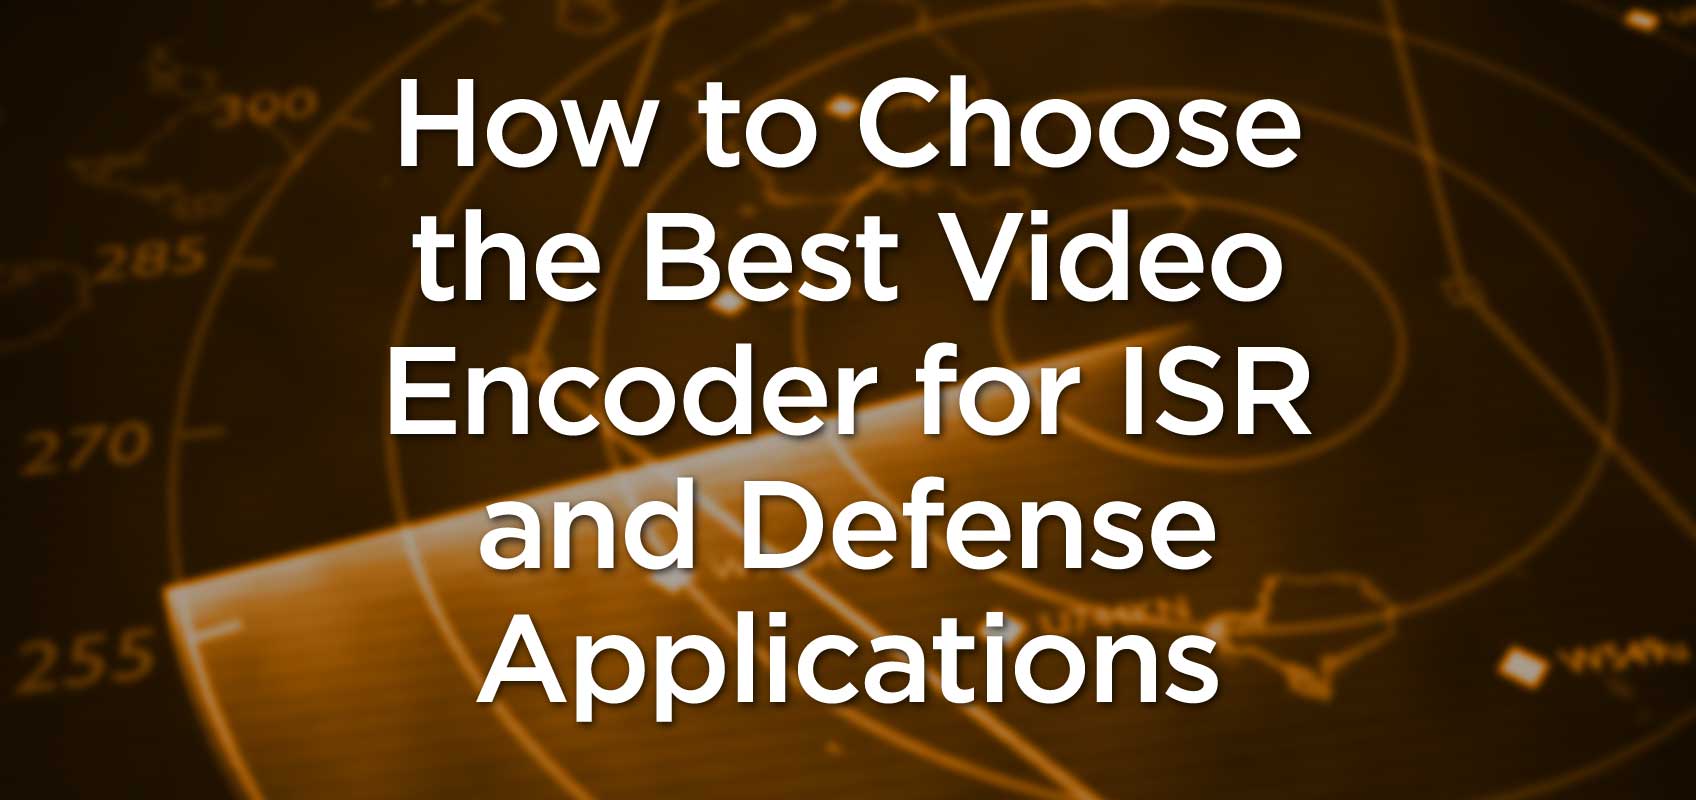 The best video encoder for ISR and Defense applications